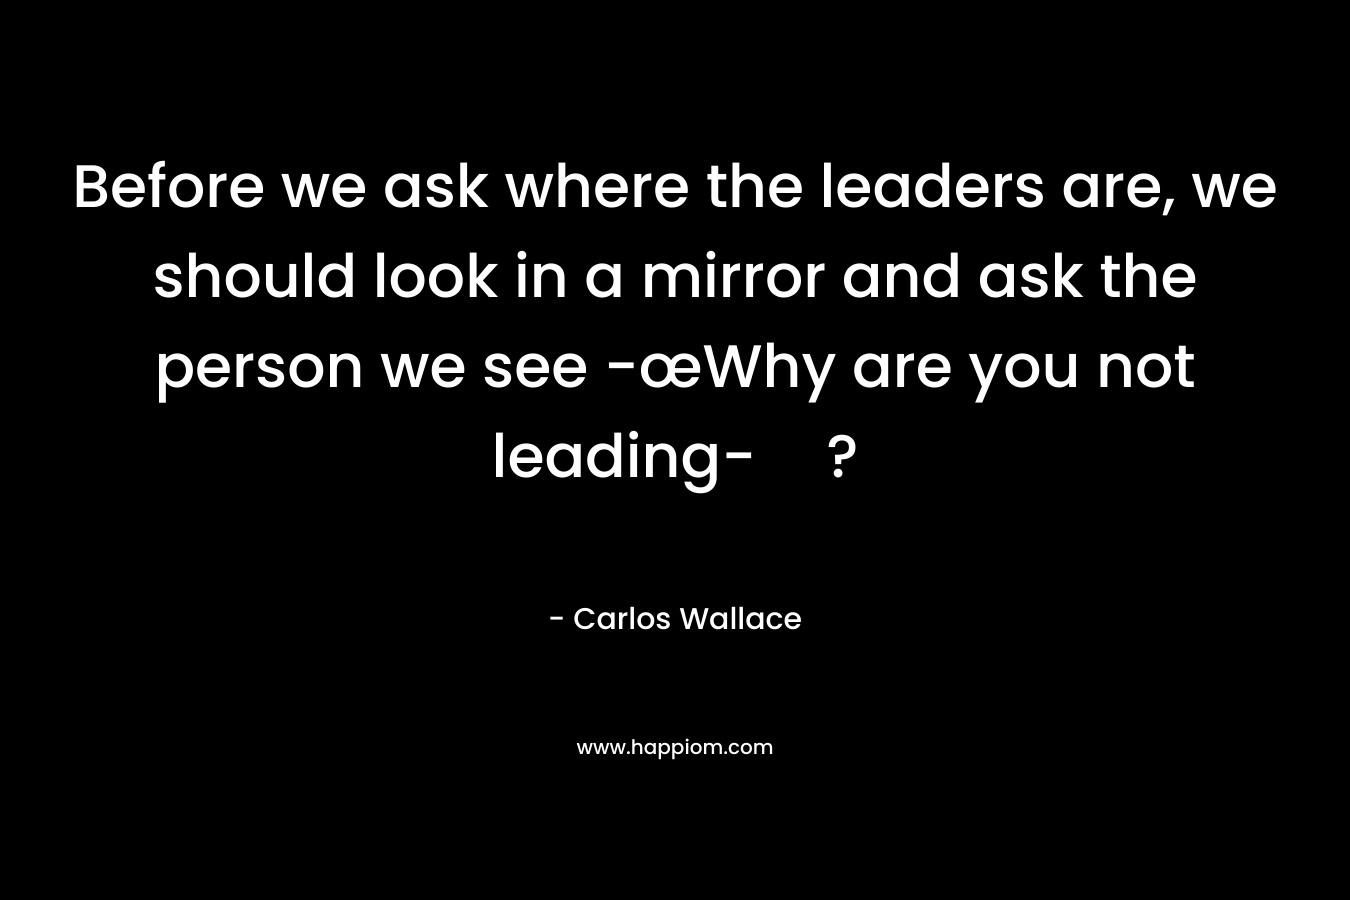 Before we ask where the leaders are, we should look in a mirror and ask the person we see -œWhy are you not leading-?